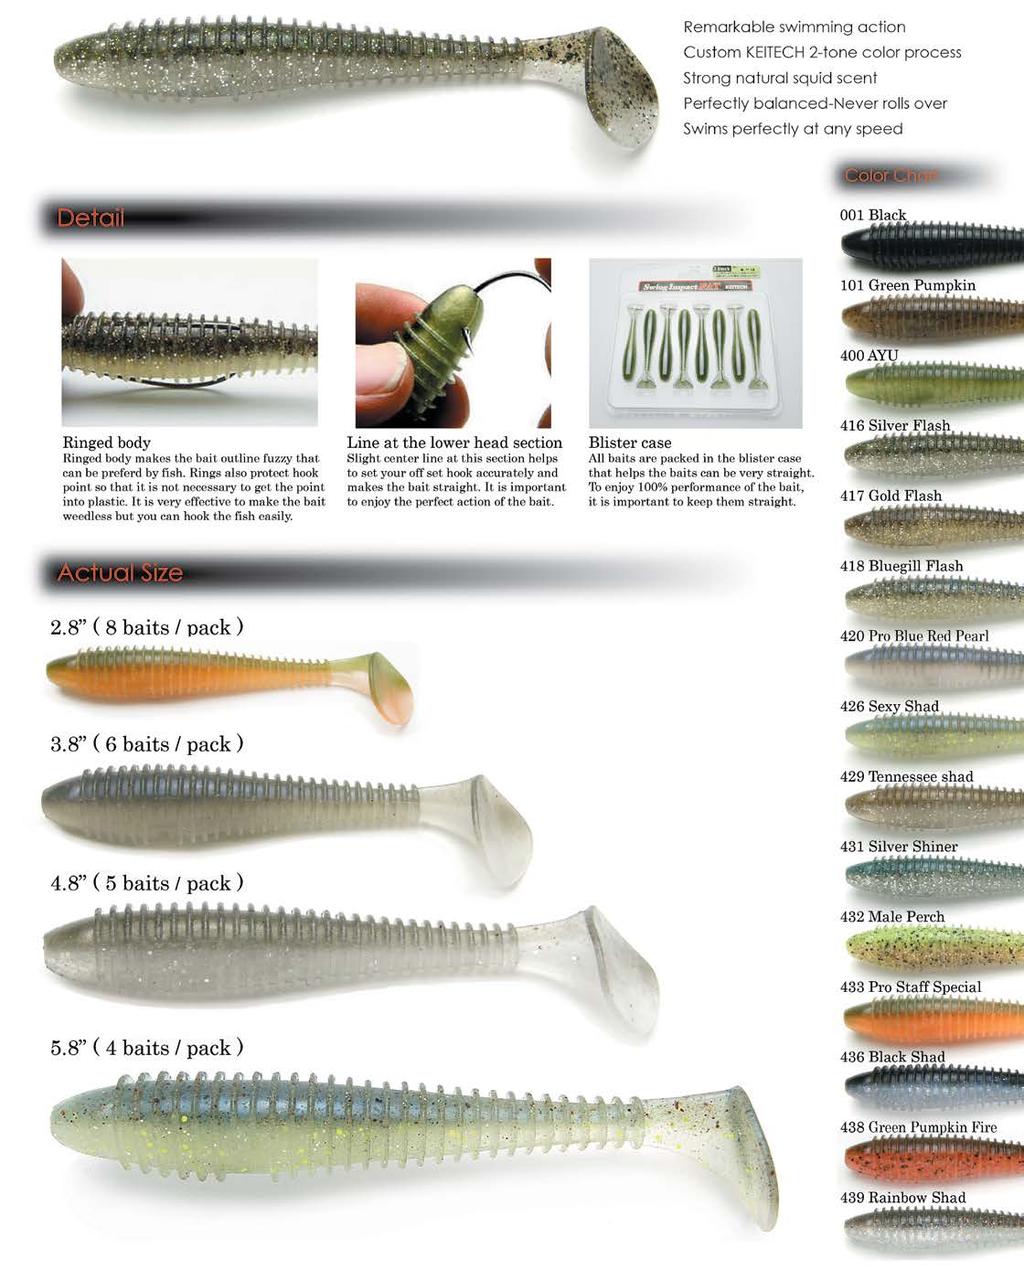 Swing Impact FAT The Fat Swing Impact has really taken the Paddle tail swim bait to the next level.